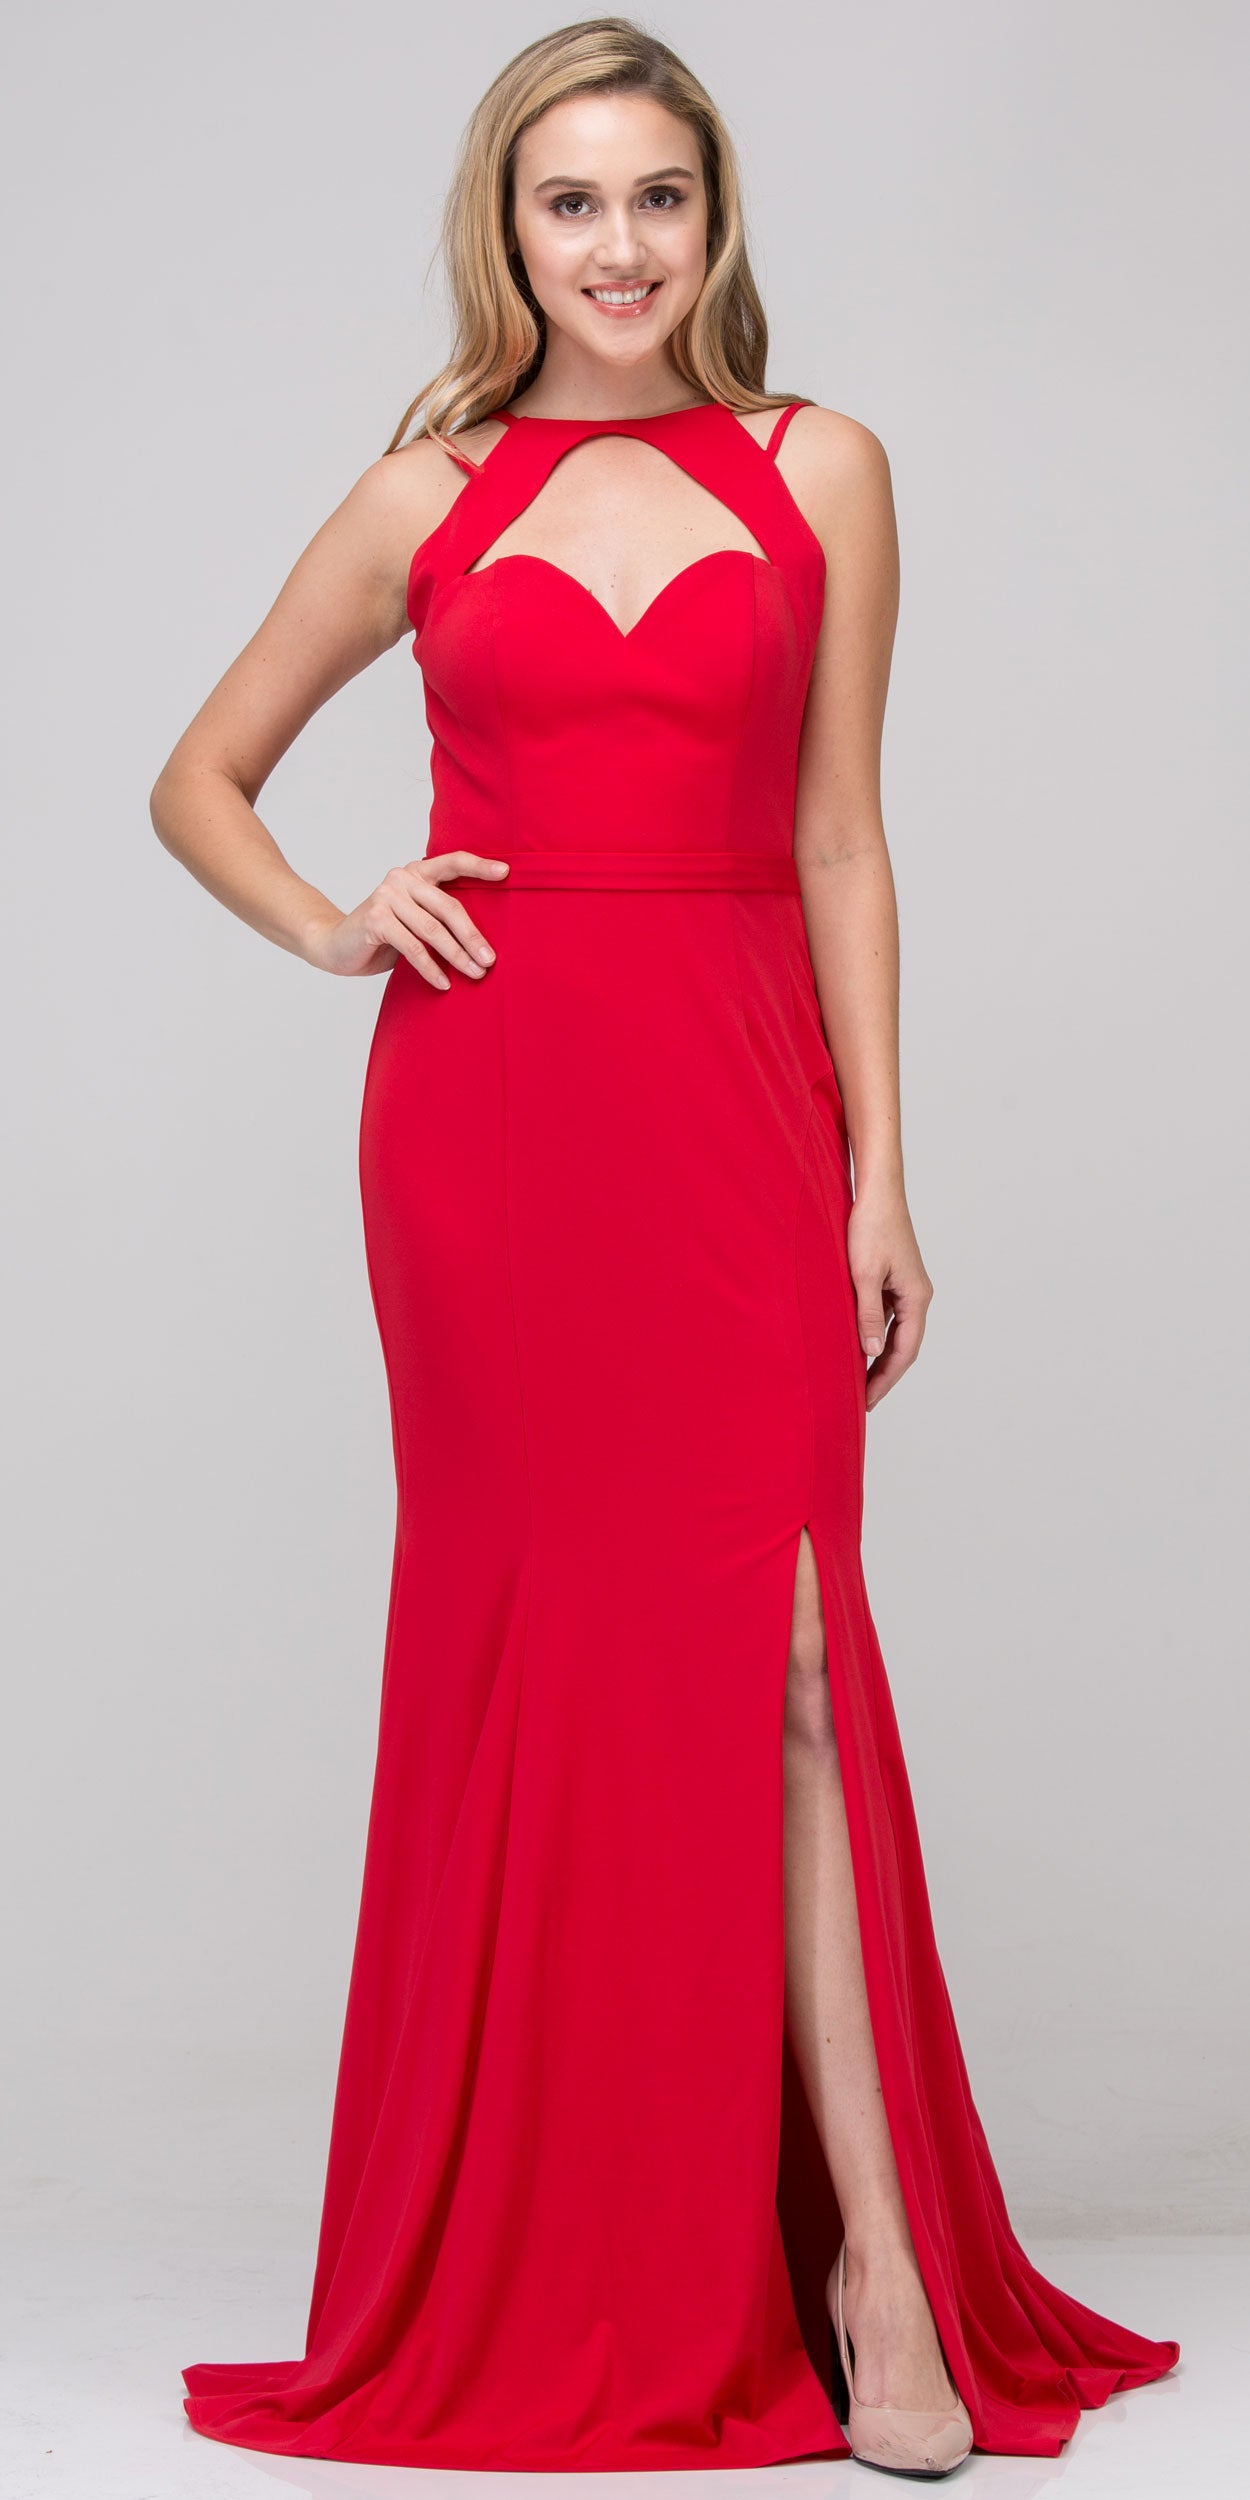 Image of Cutout Sweetheart Neckline Long Fitted Formal Prom Dress in Red